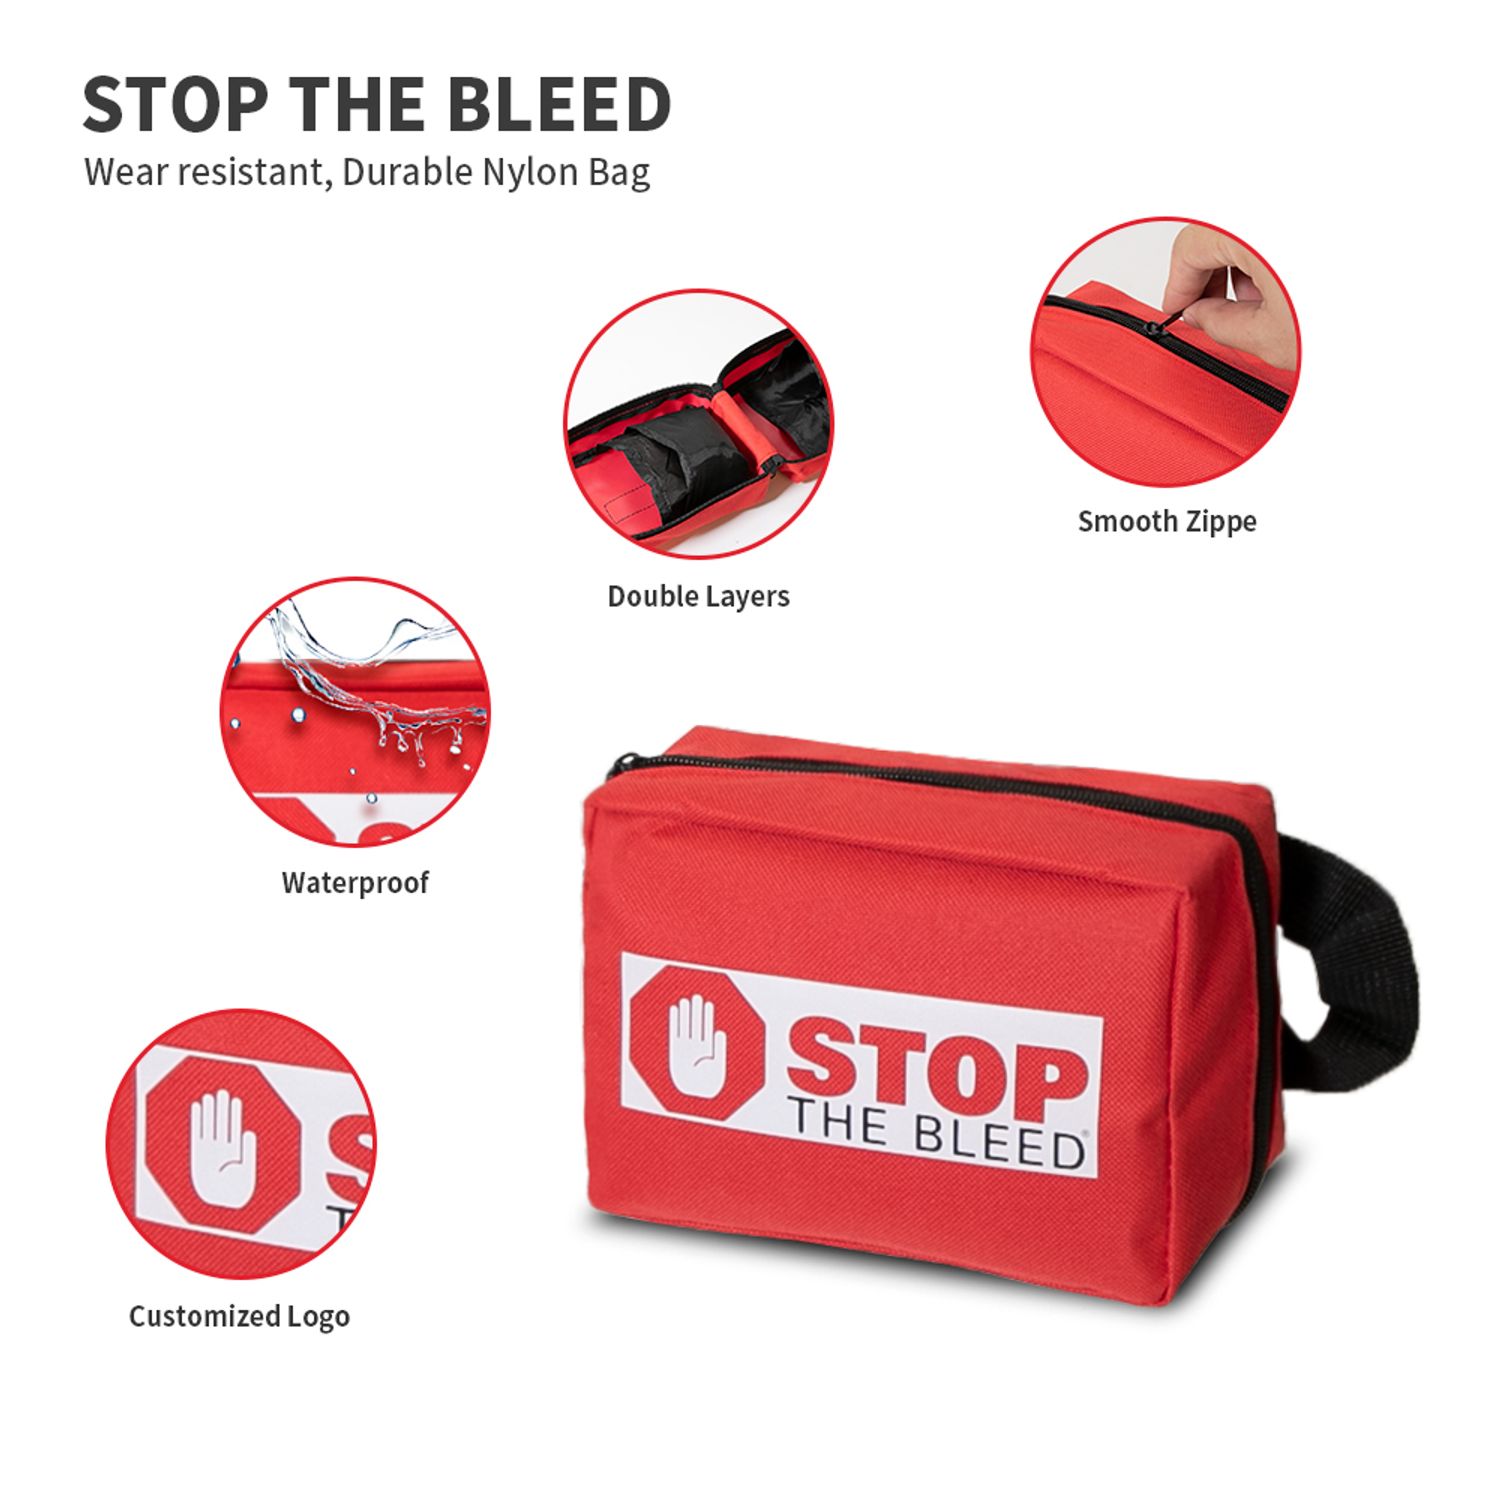 Risen Medical stop the bleed first aid kit features: waterproof, double layers, customized logo, smooth zipper